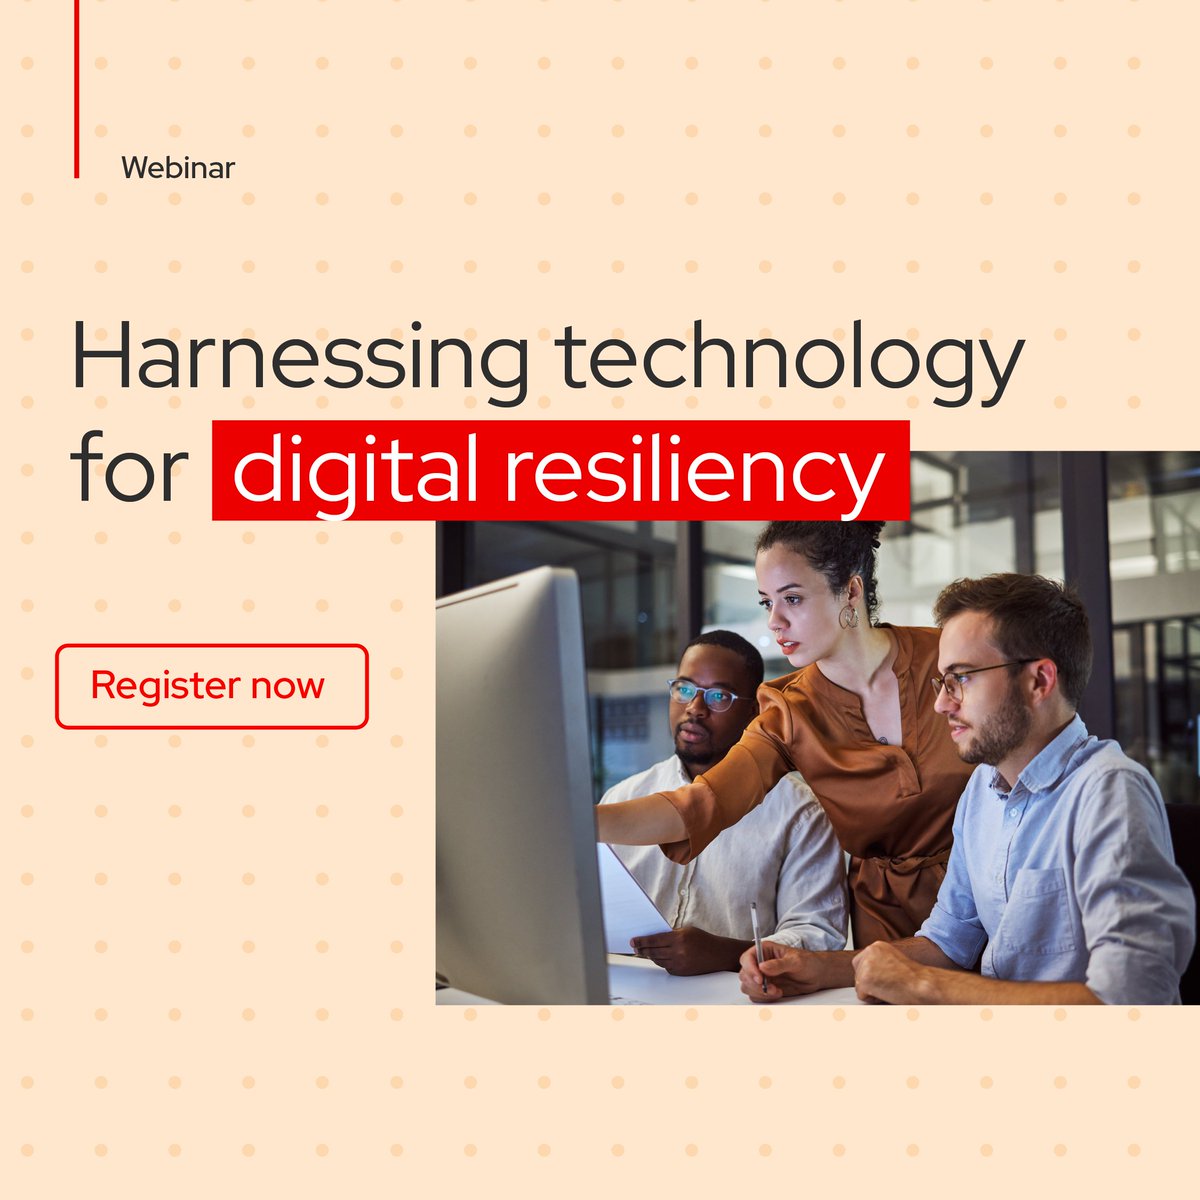 Hear insights from Daniel-Zoe Jimenez, VP for IDC's APAC region, and Gaurav Sharma, Director and Head of the Global Business Value Centre of Excellence at Red Hat as they discuss how best to drive business agility and resilience. Reserve your seat now! red.ht/4aYQdm3